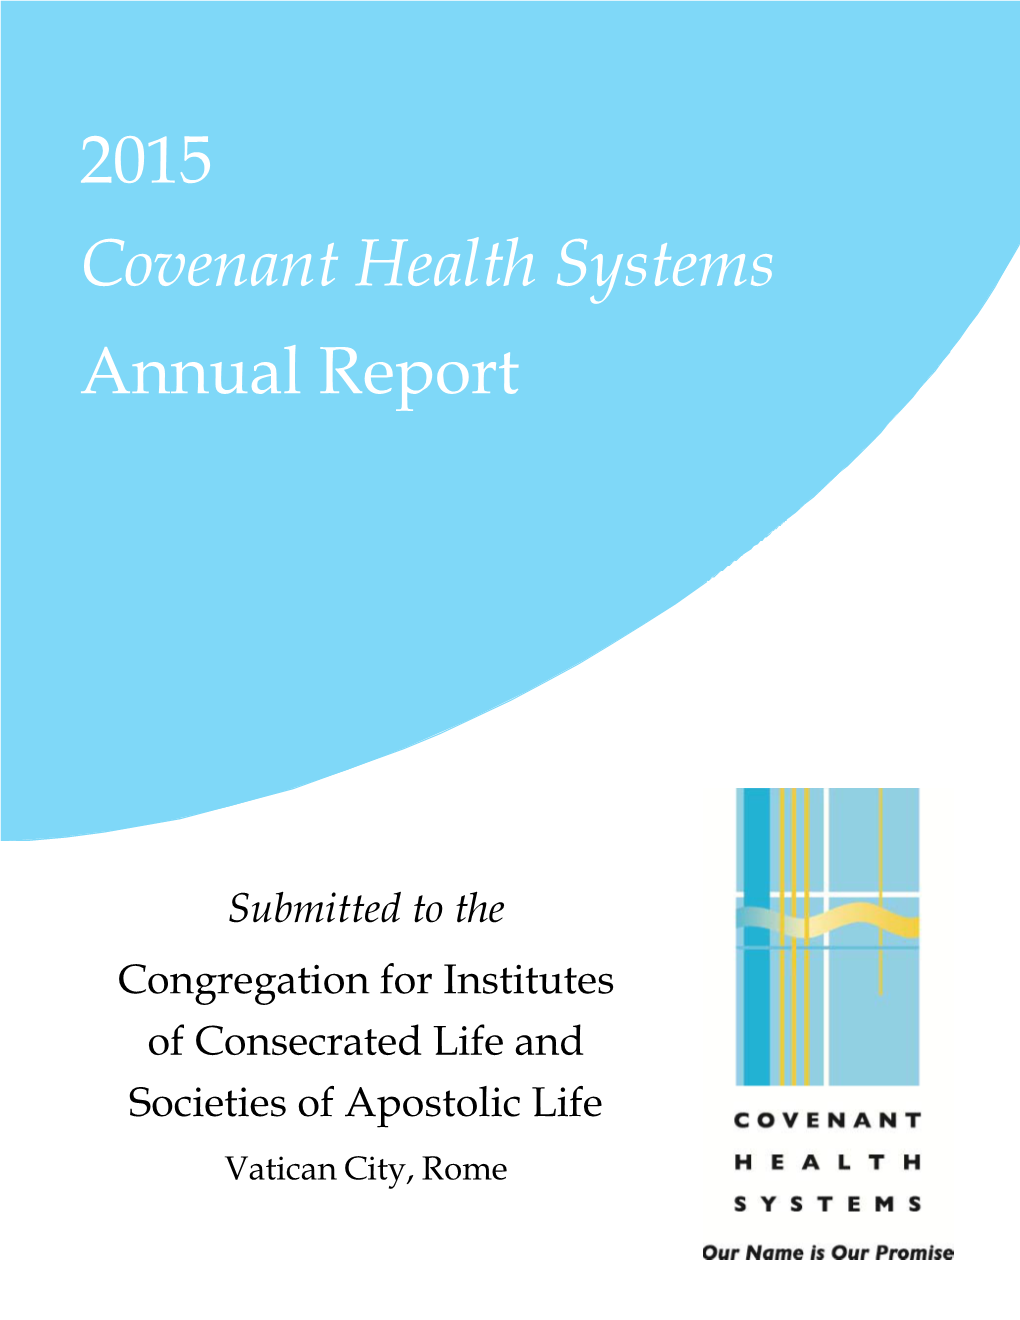 2015 Covenant Health Systems Annual Report